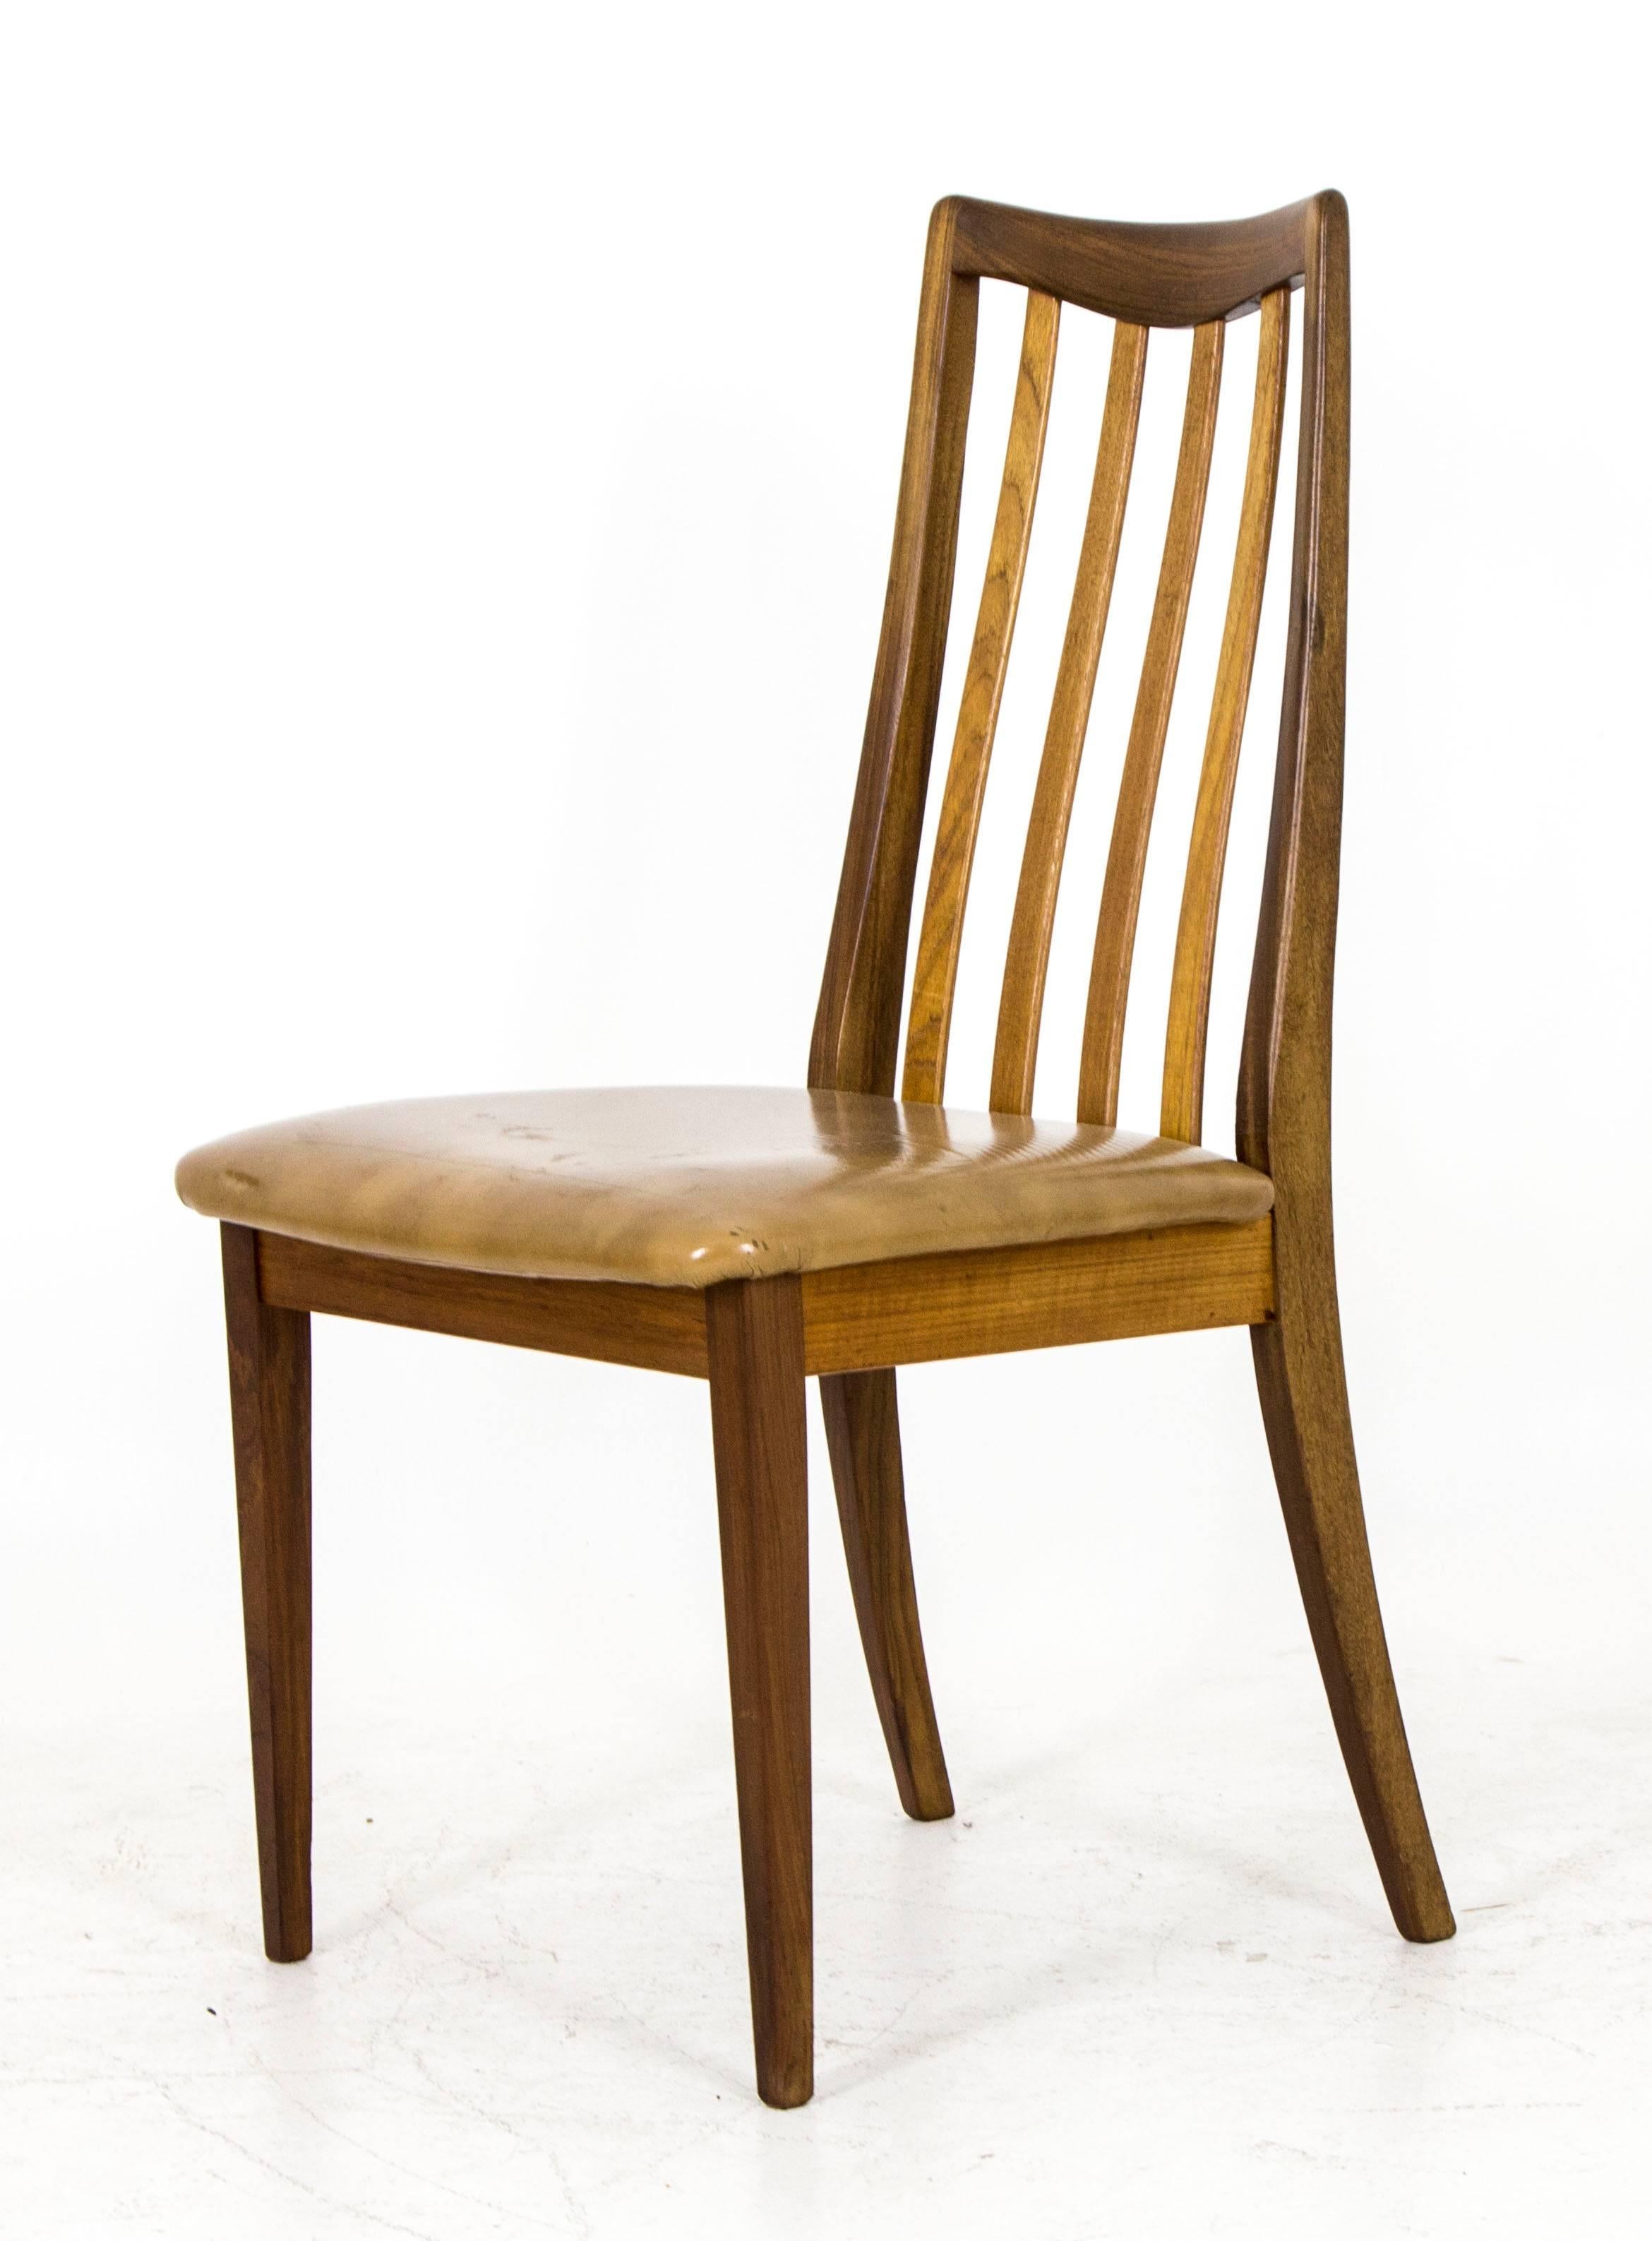 Hand-Crafted Vintage Mid-Century Modern Six Teak and Afromosia Dining Chairs by LG Dandy